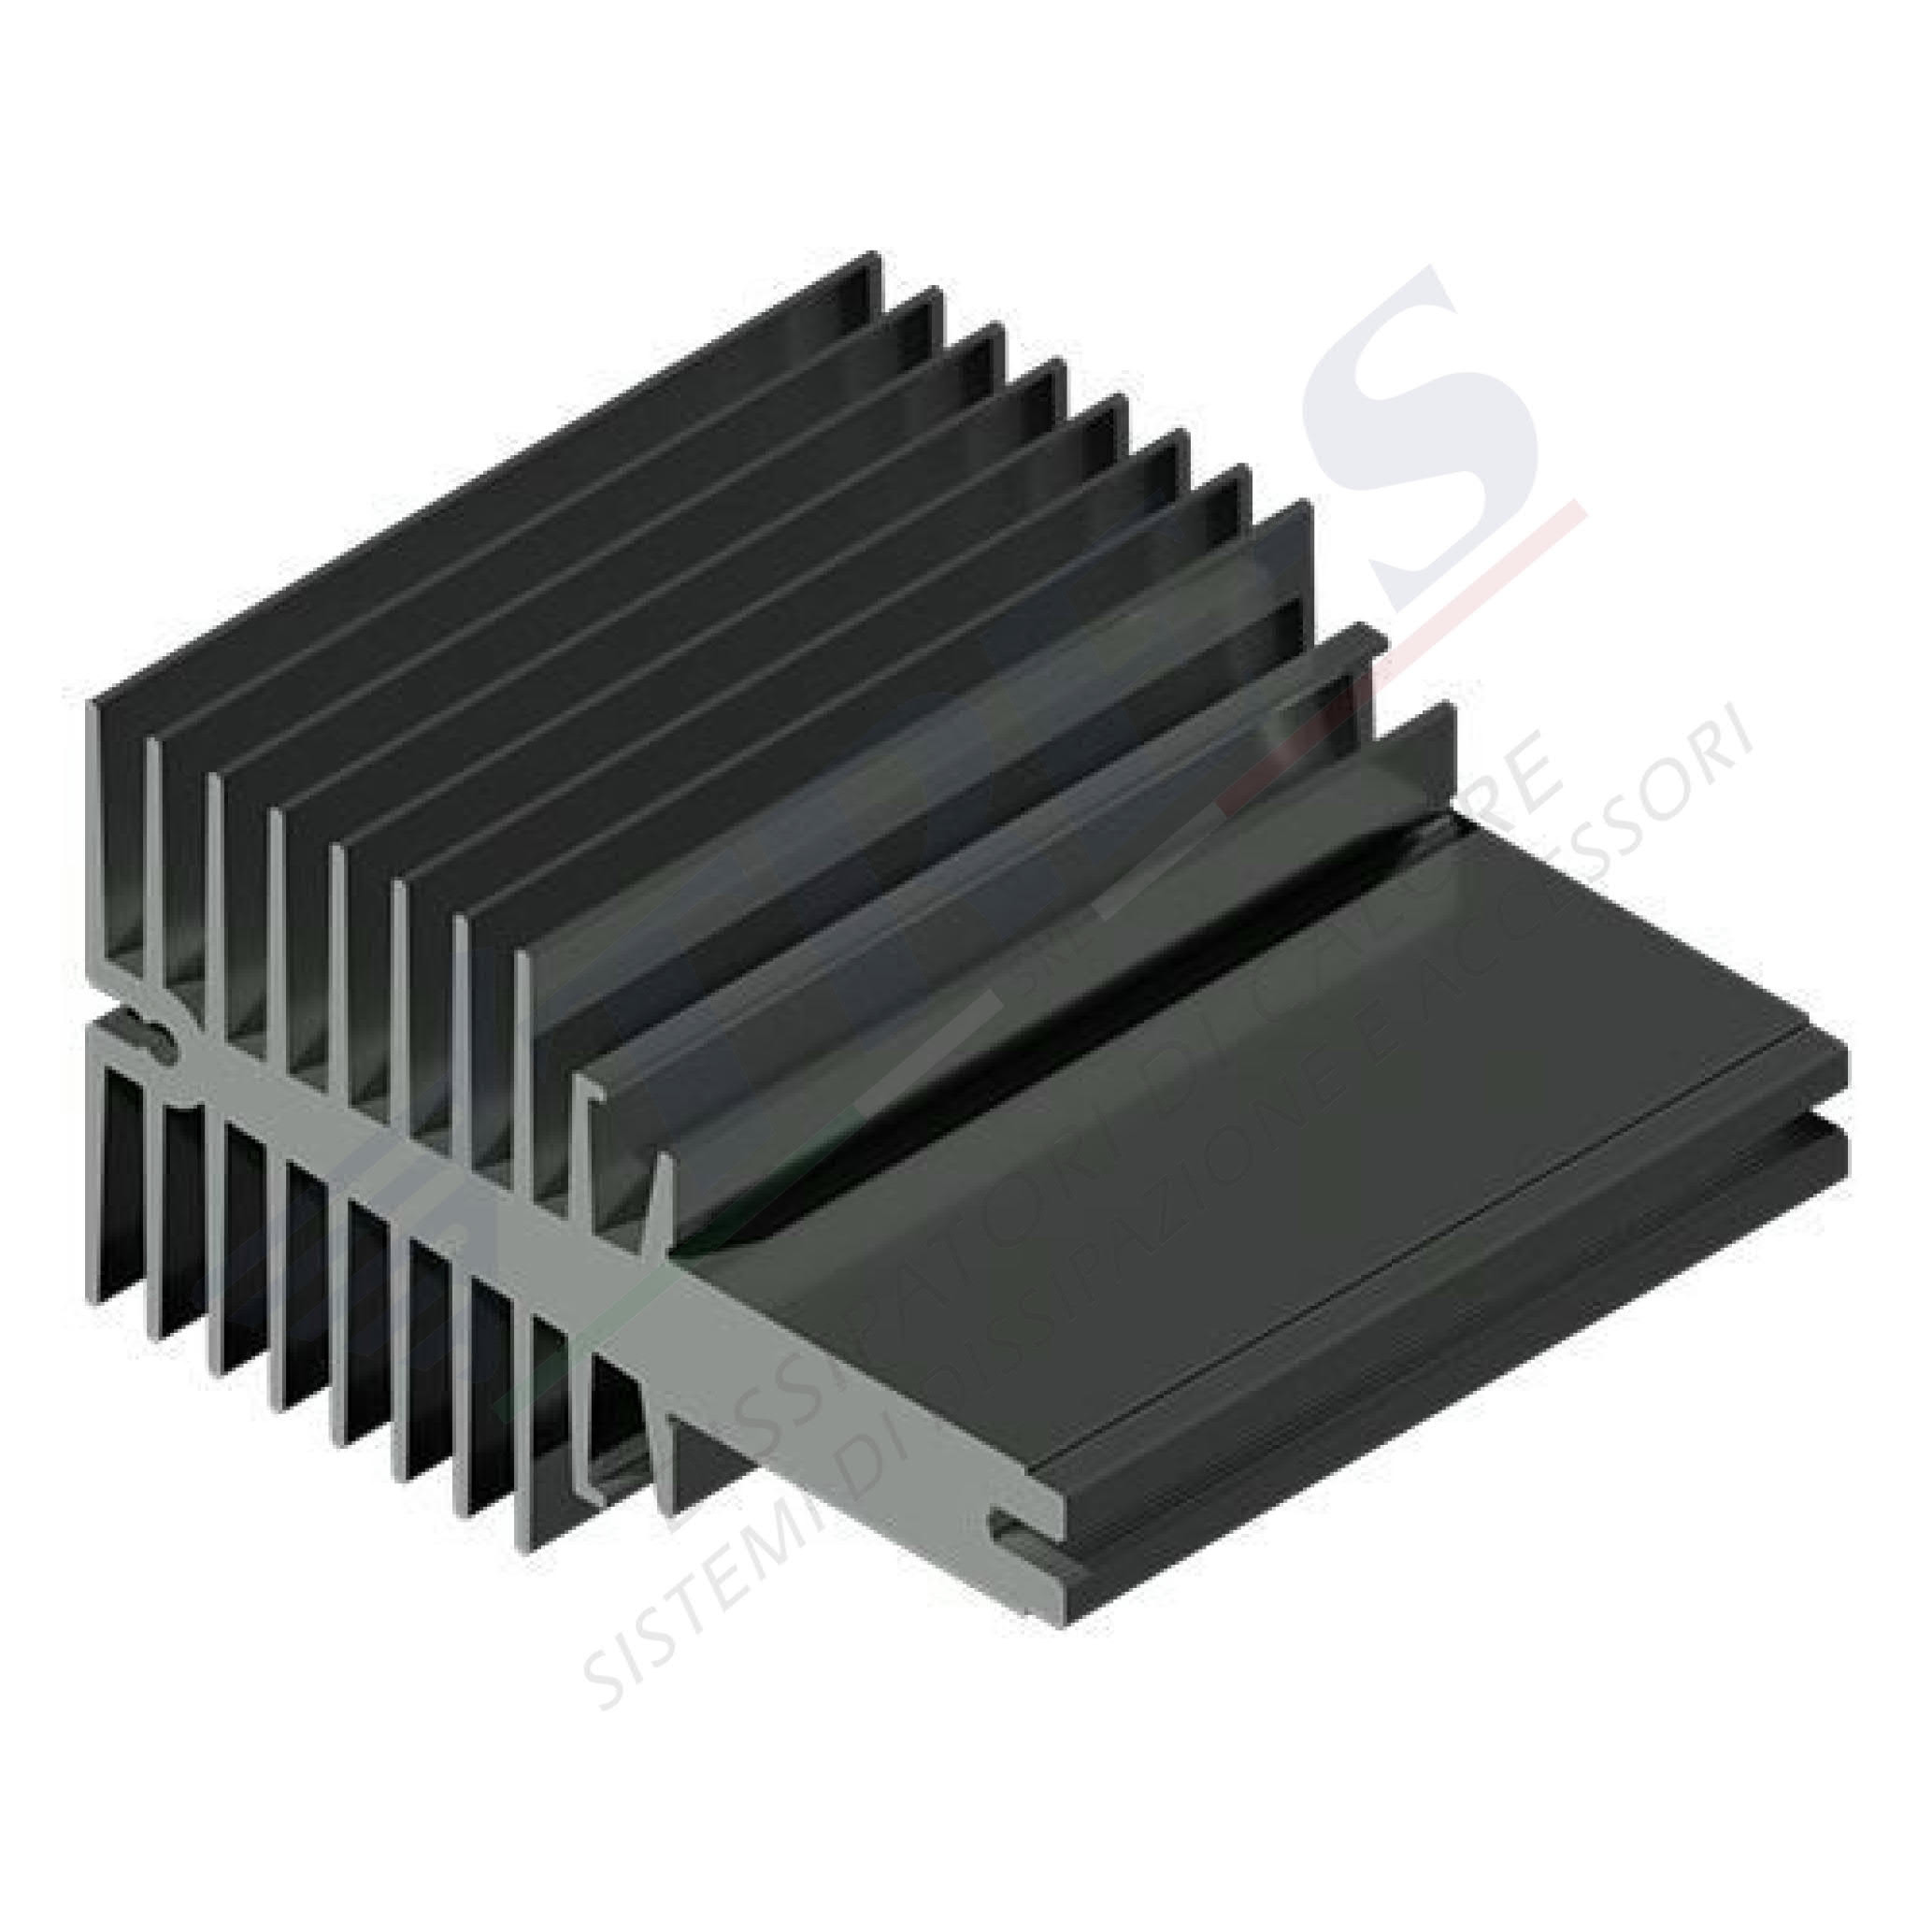 PRO1296 - Heat sinks with clip system